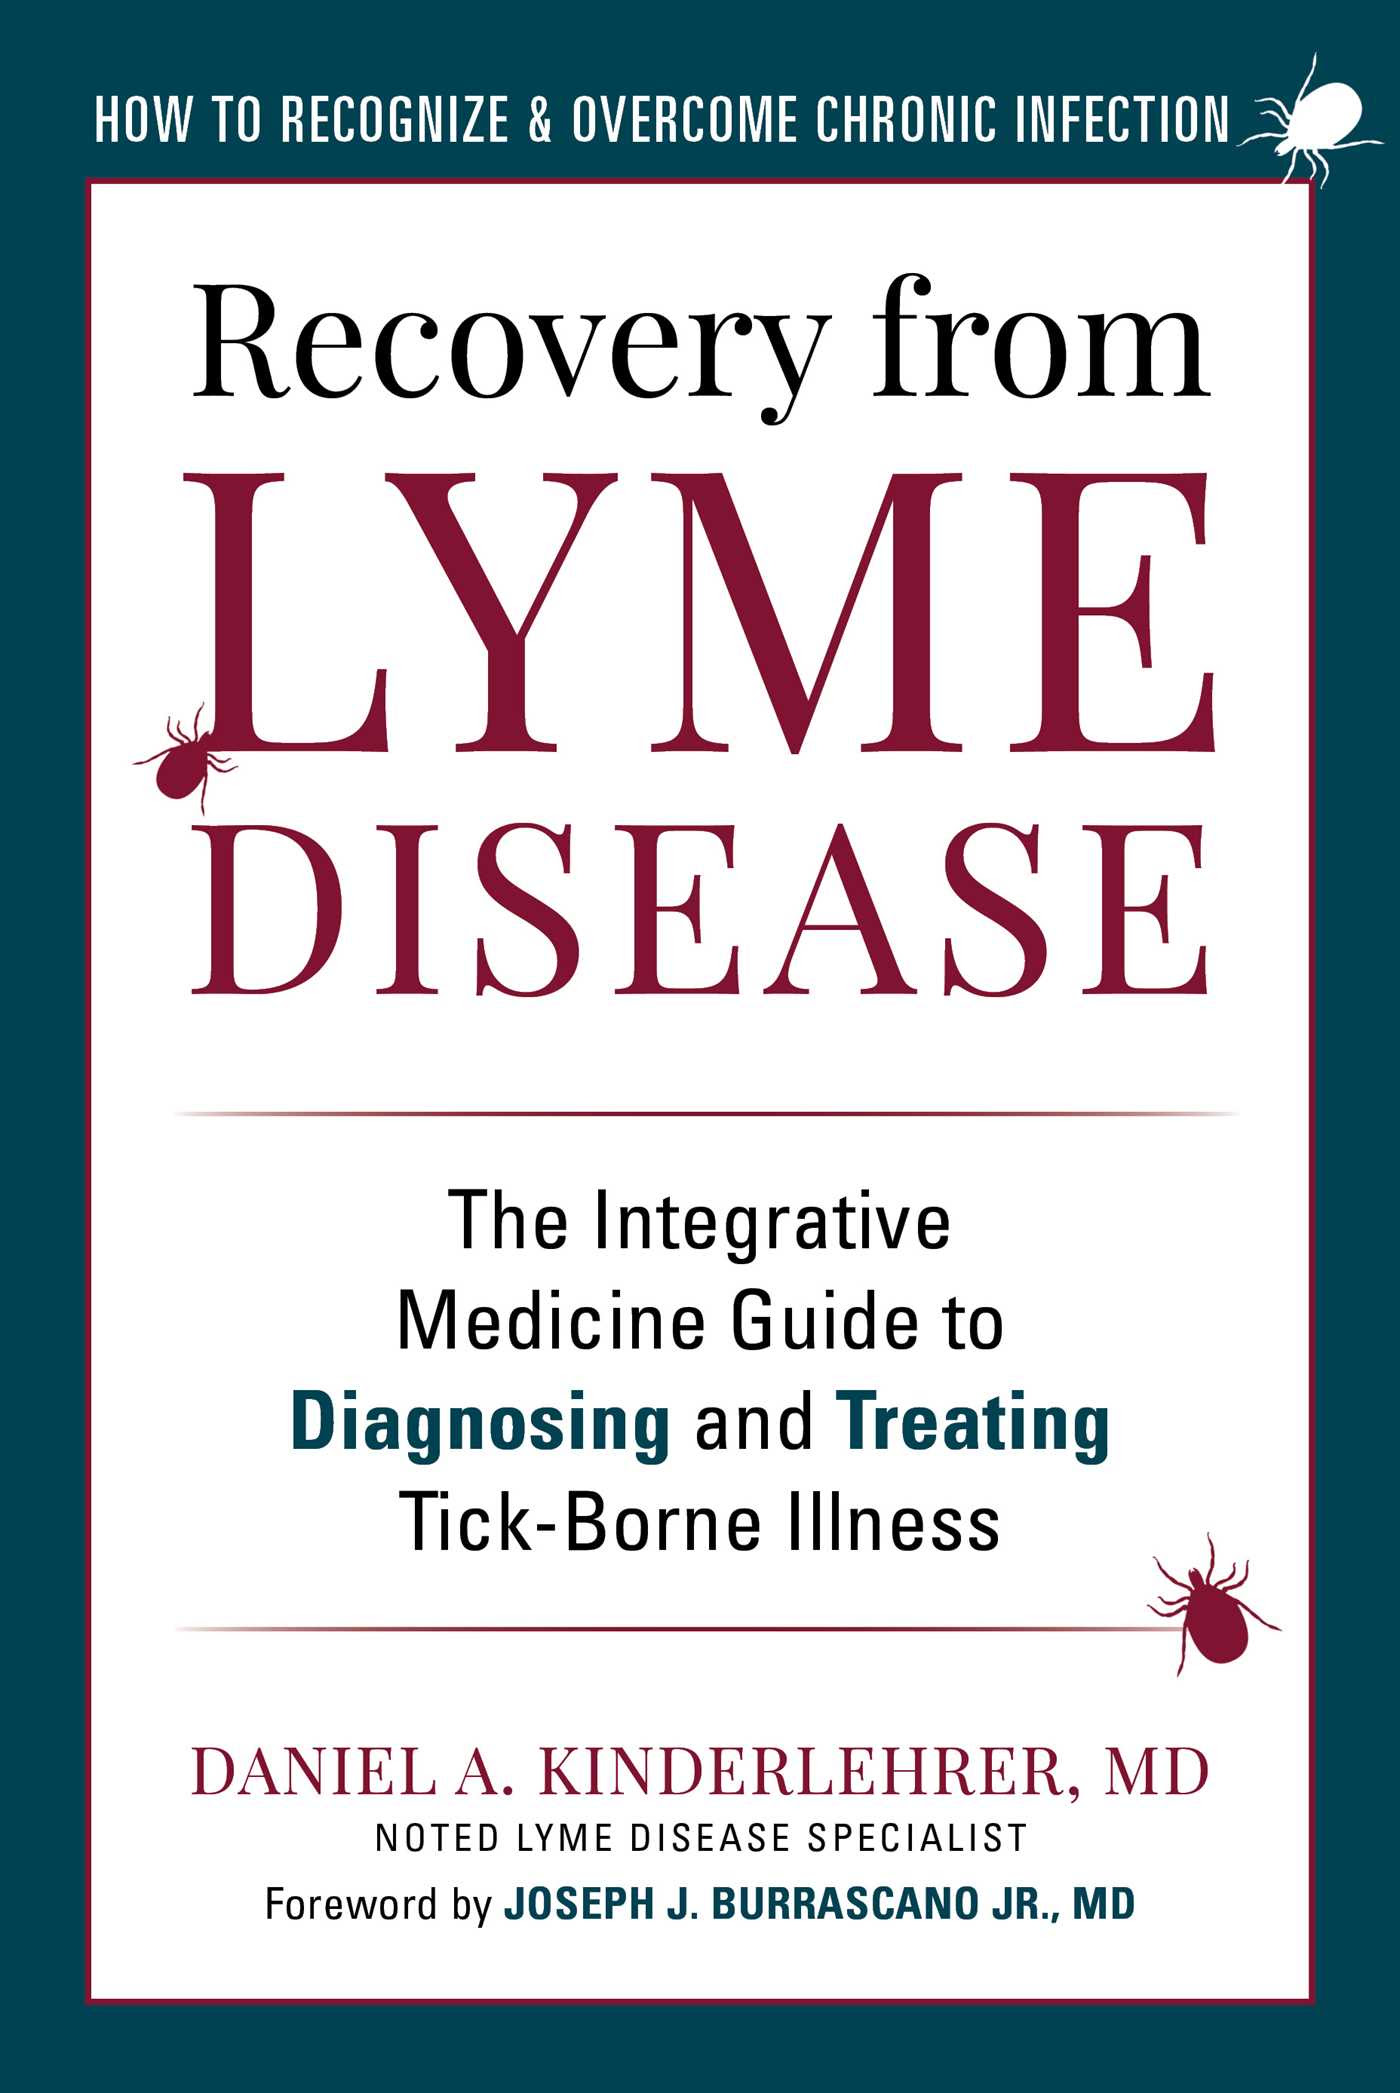 Recovery from Lyme Disease: The Integrative Medicine Guide to Diagnosing and Treating Tick-Borne Illness PDF